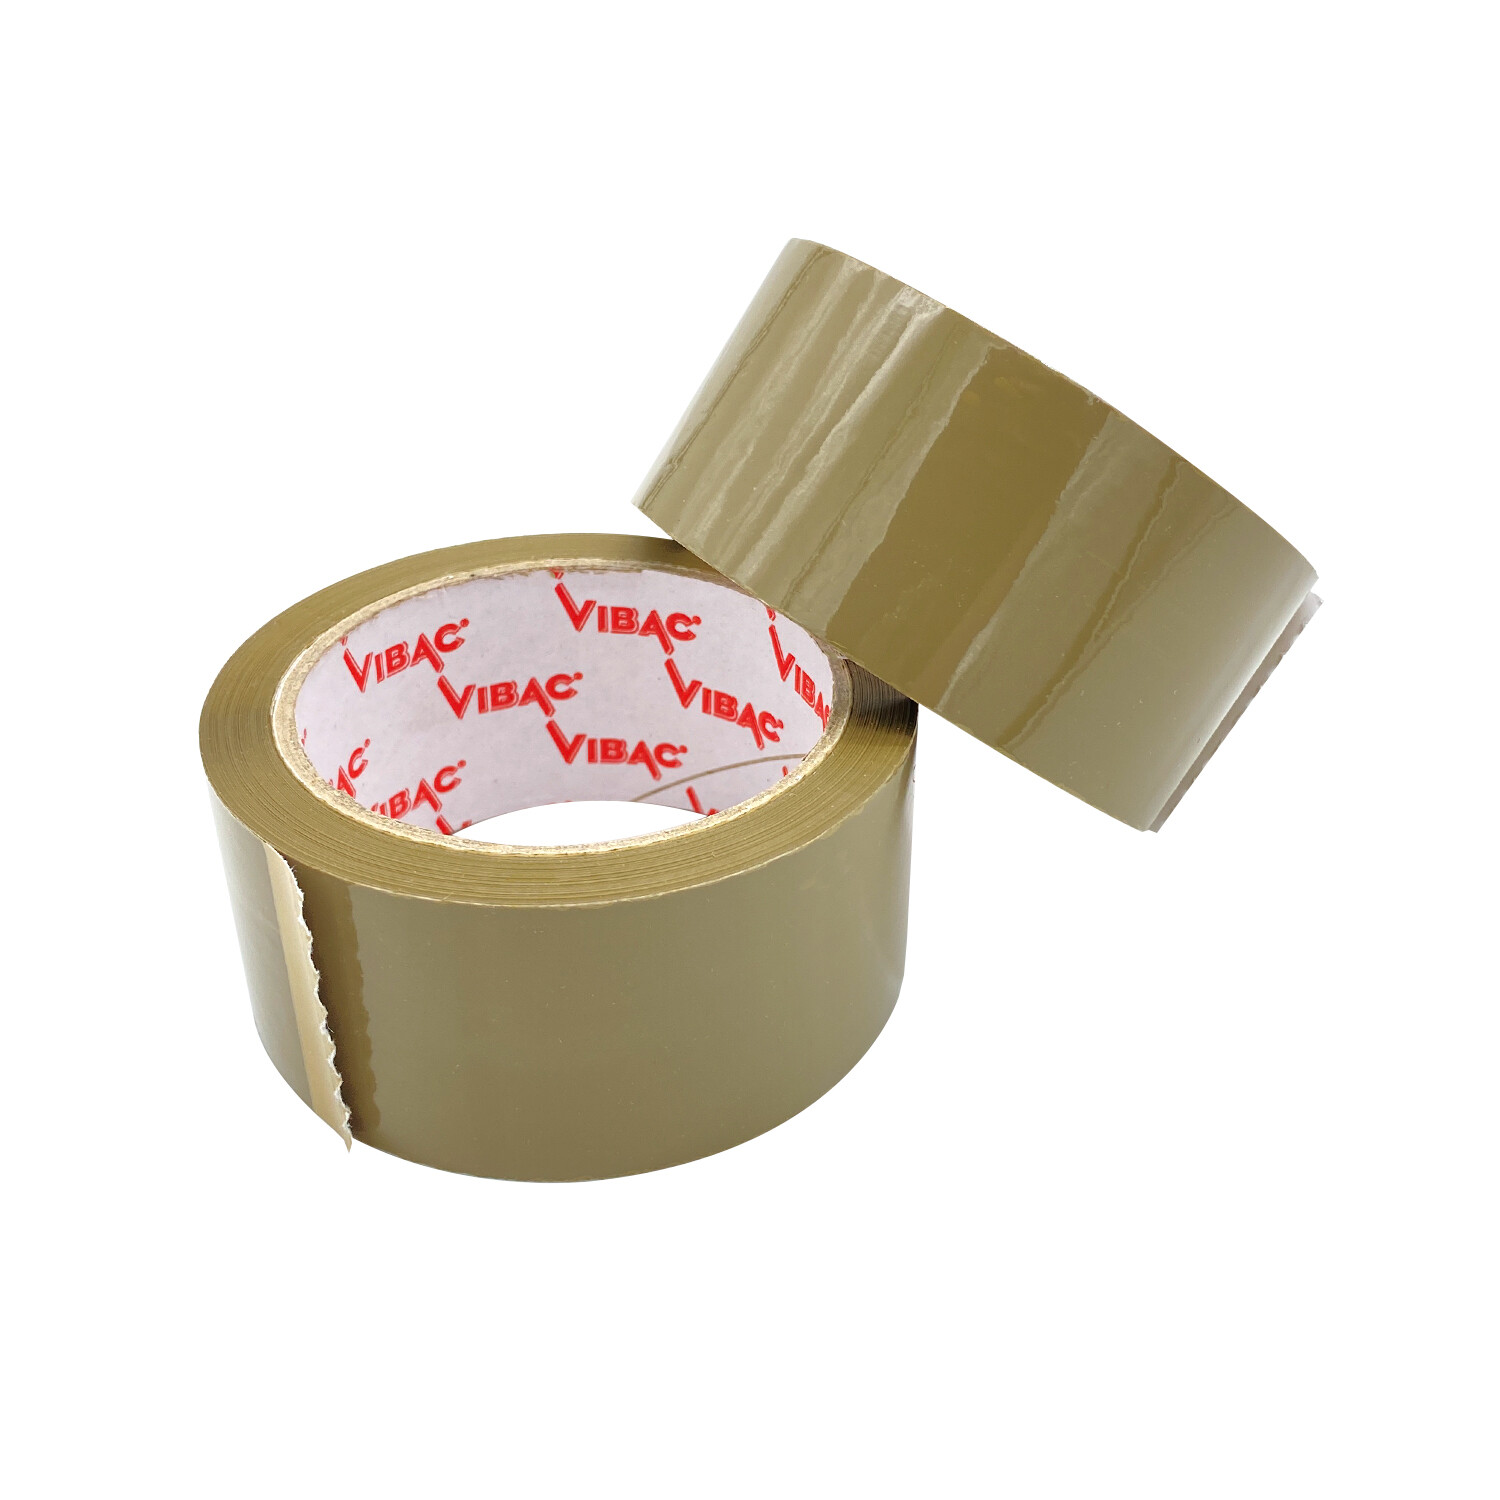 NEW 3 Rolls Of CONTENTS CHECKED Printed Packing Tape 48x66m/ HIGH QUALITY 